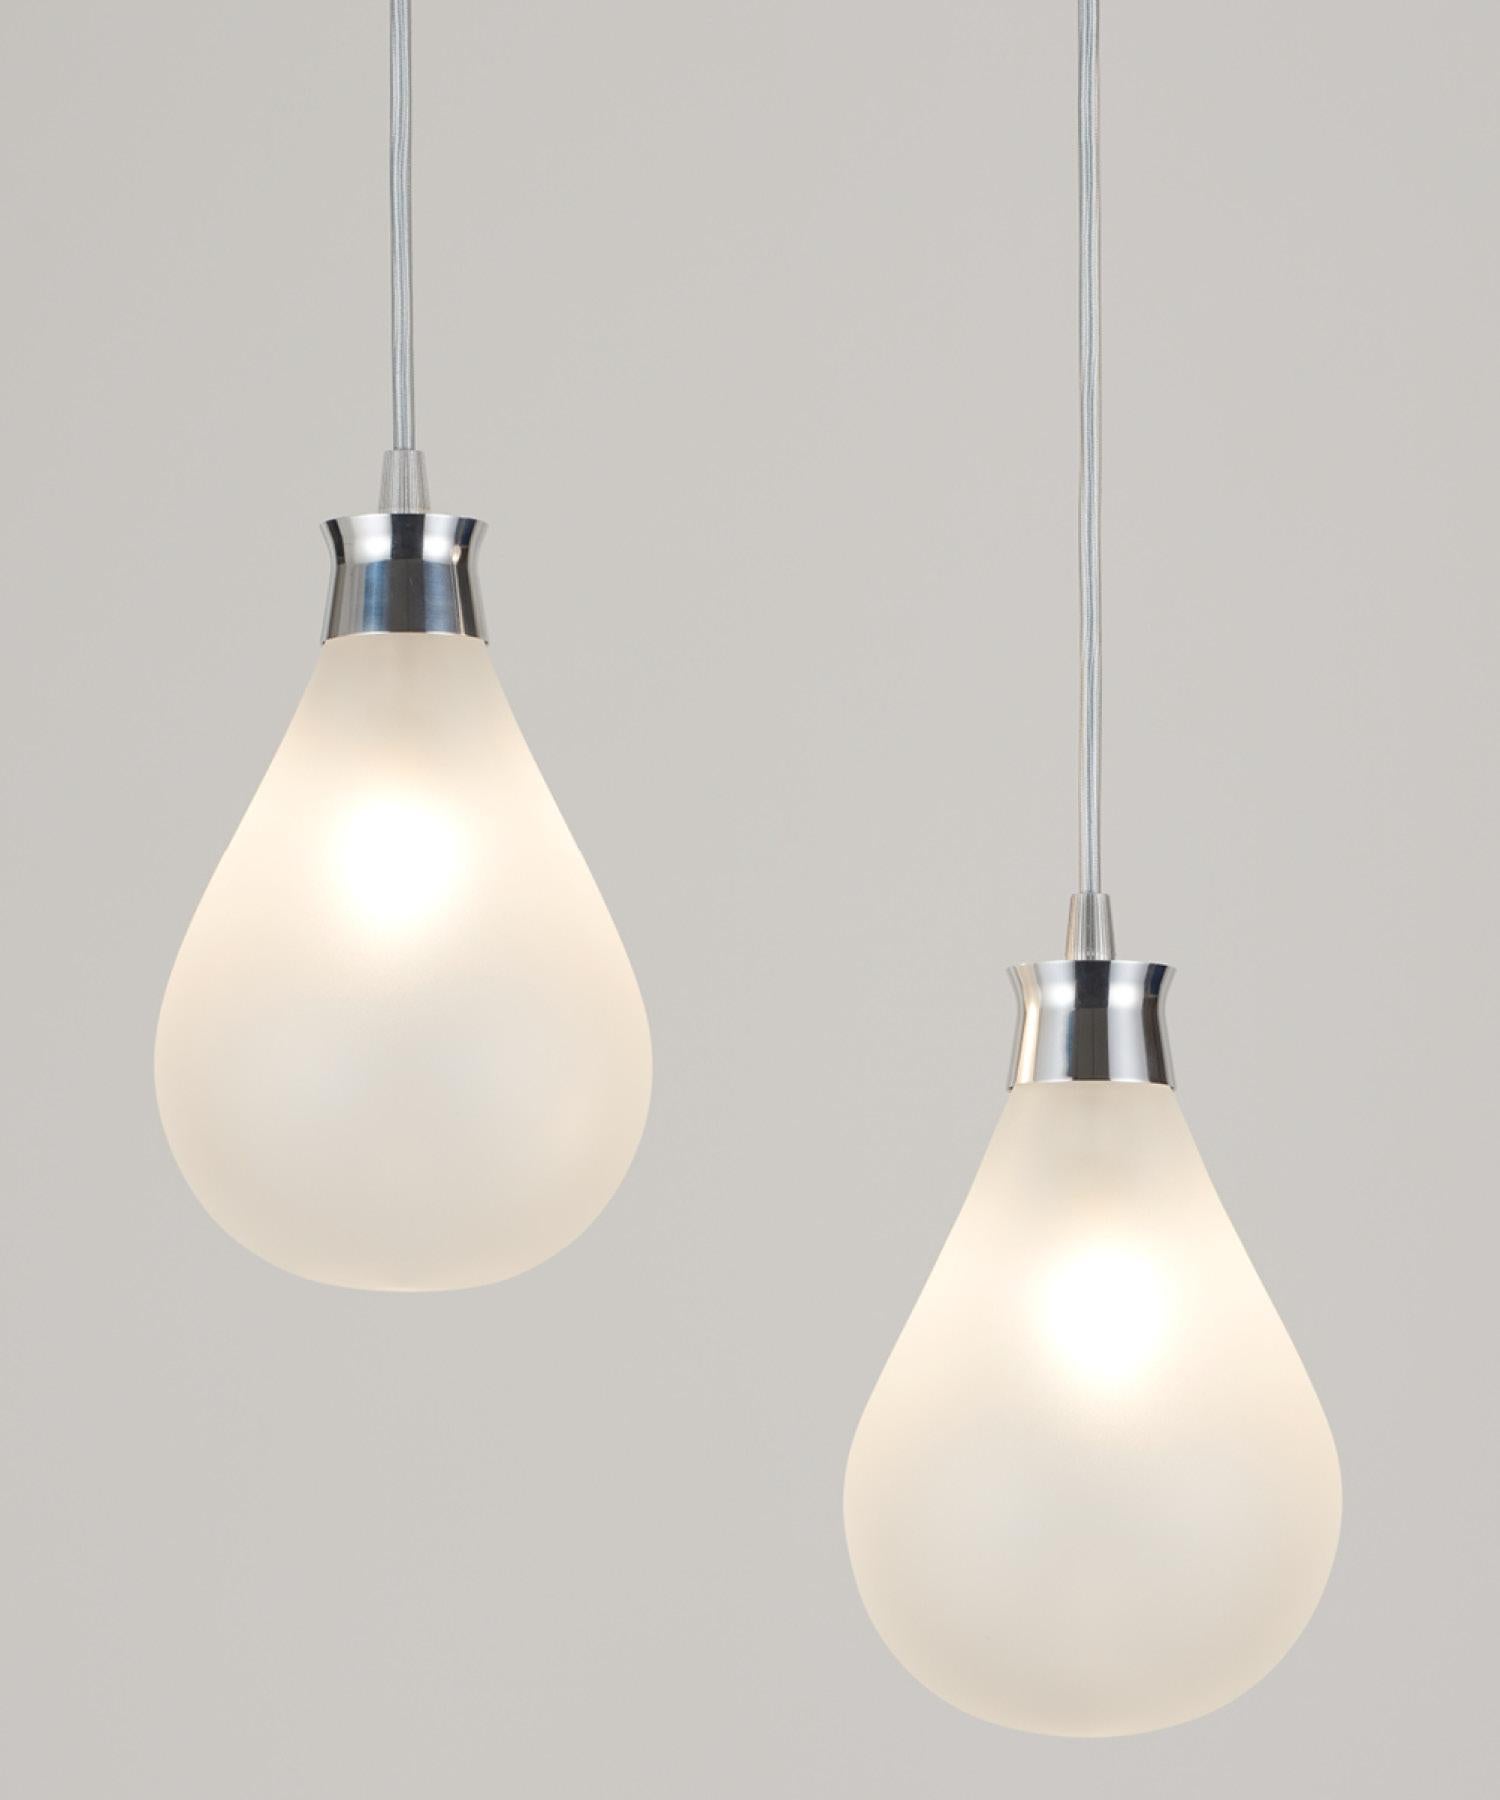 Anodized Cintola Pendant in Polished Aluminium with Smoke Grey Handblown Glass Globe For Sale